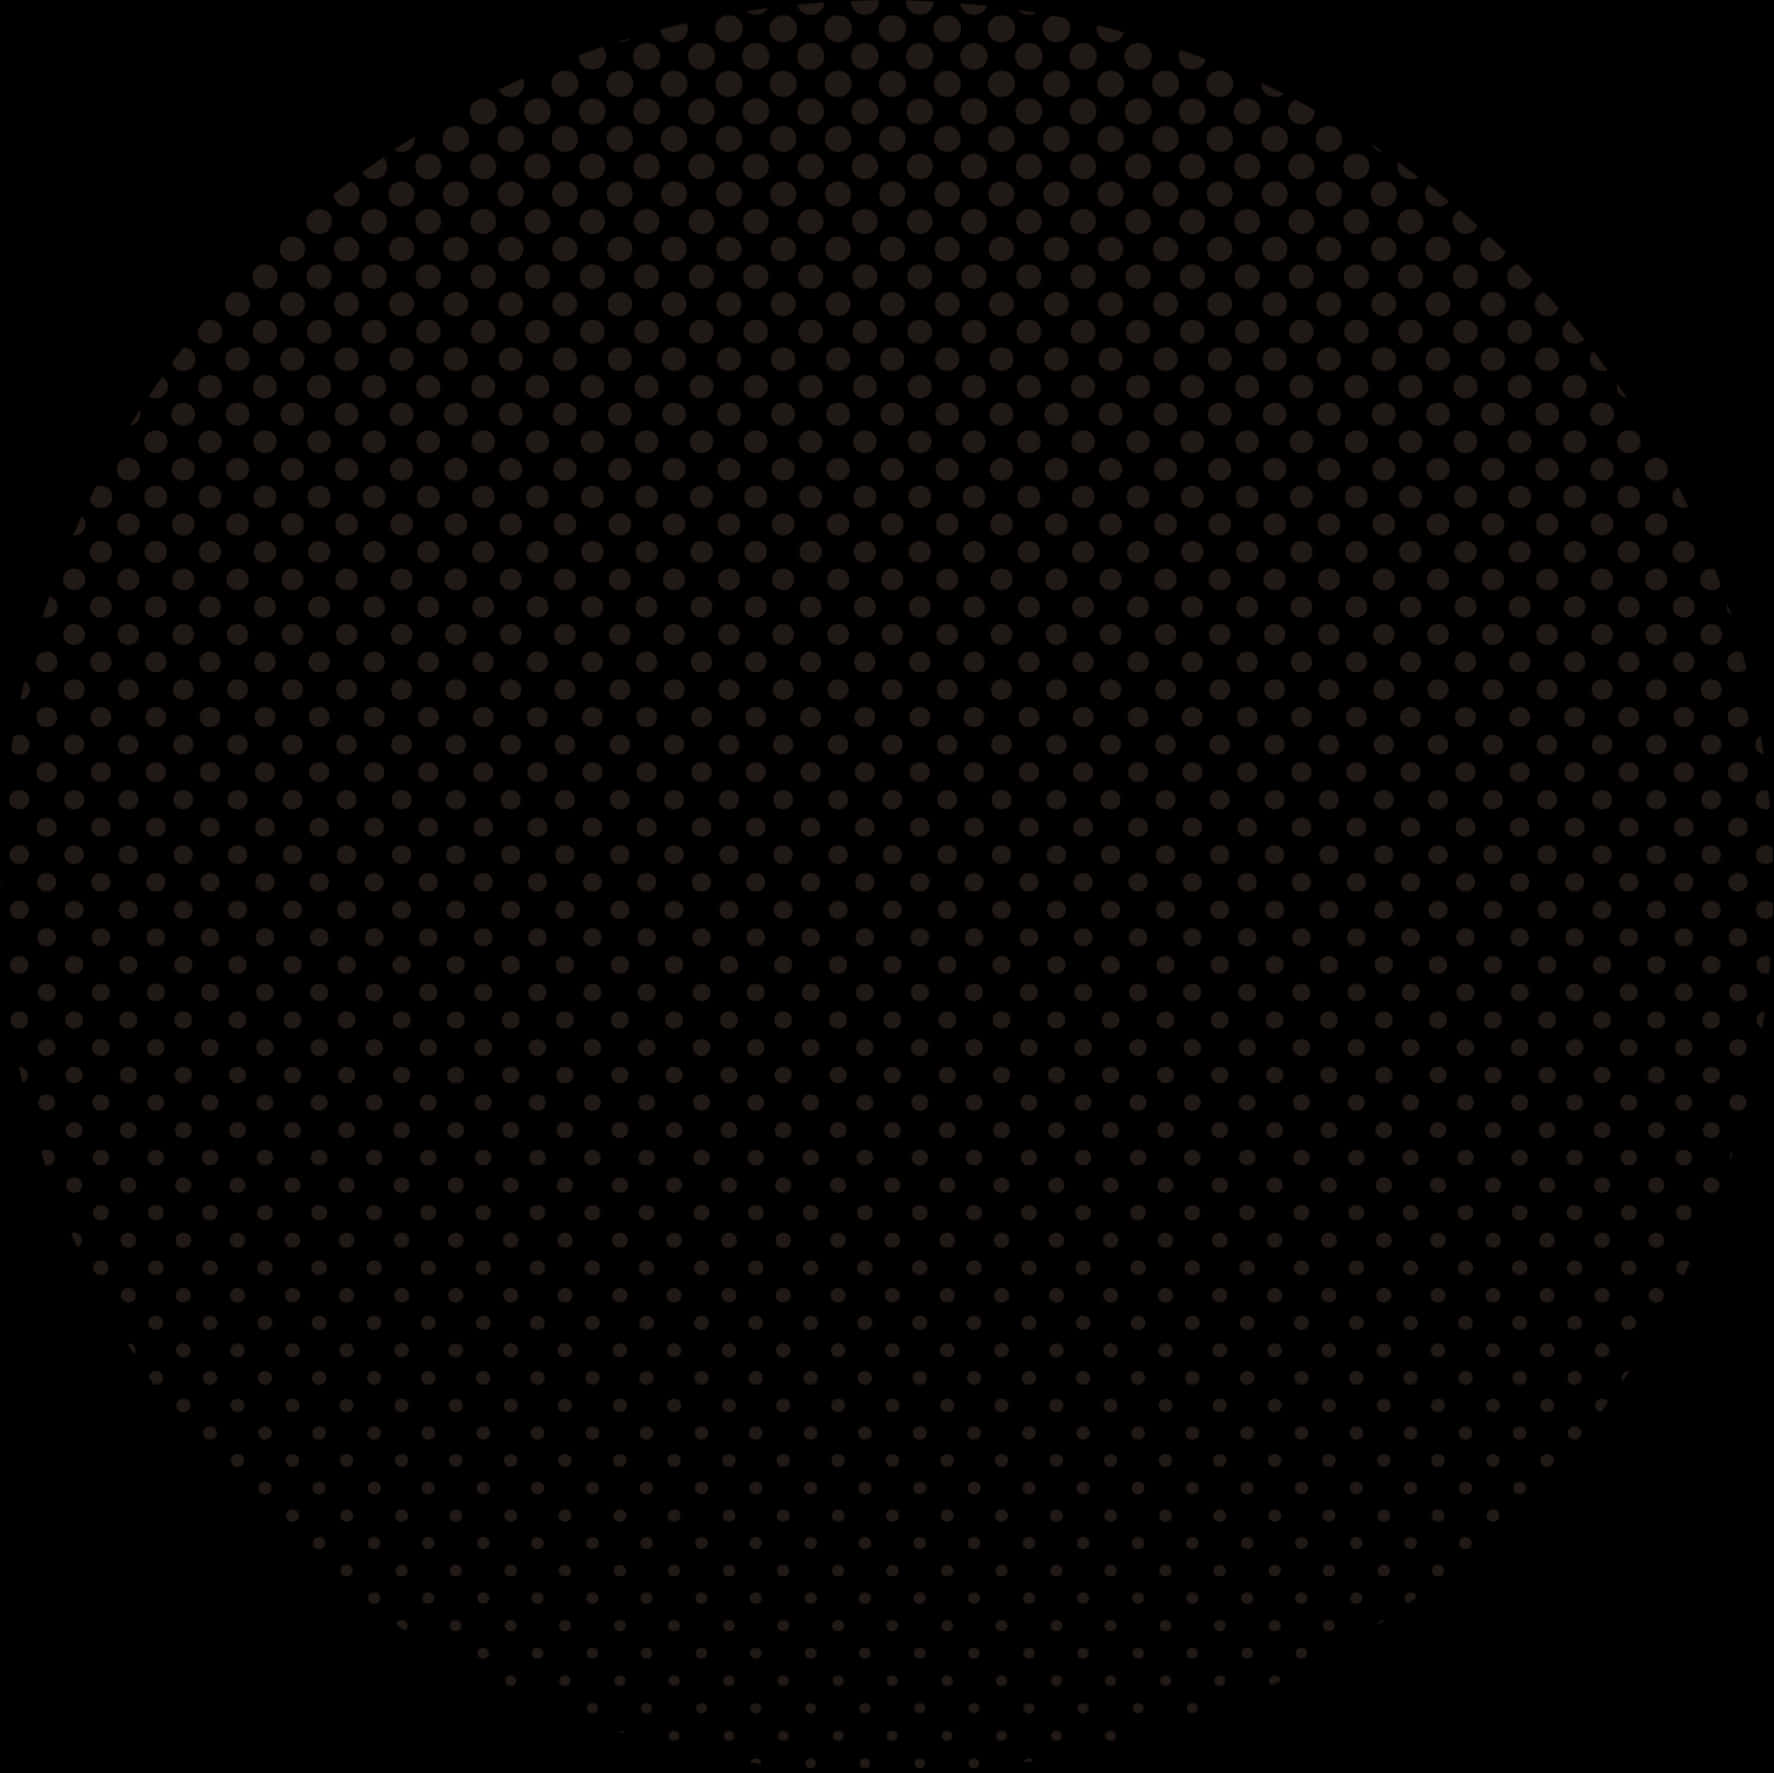 A Black Circle With Brown Dots